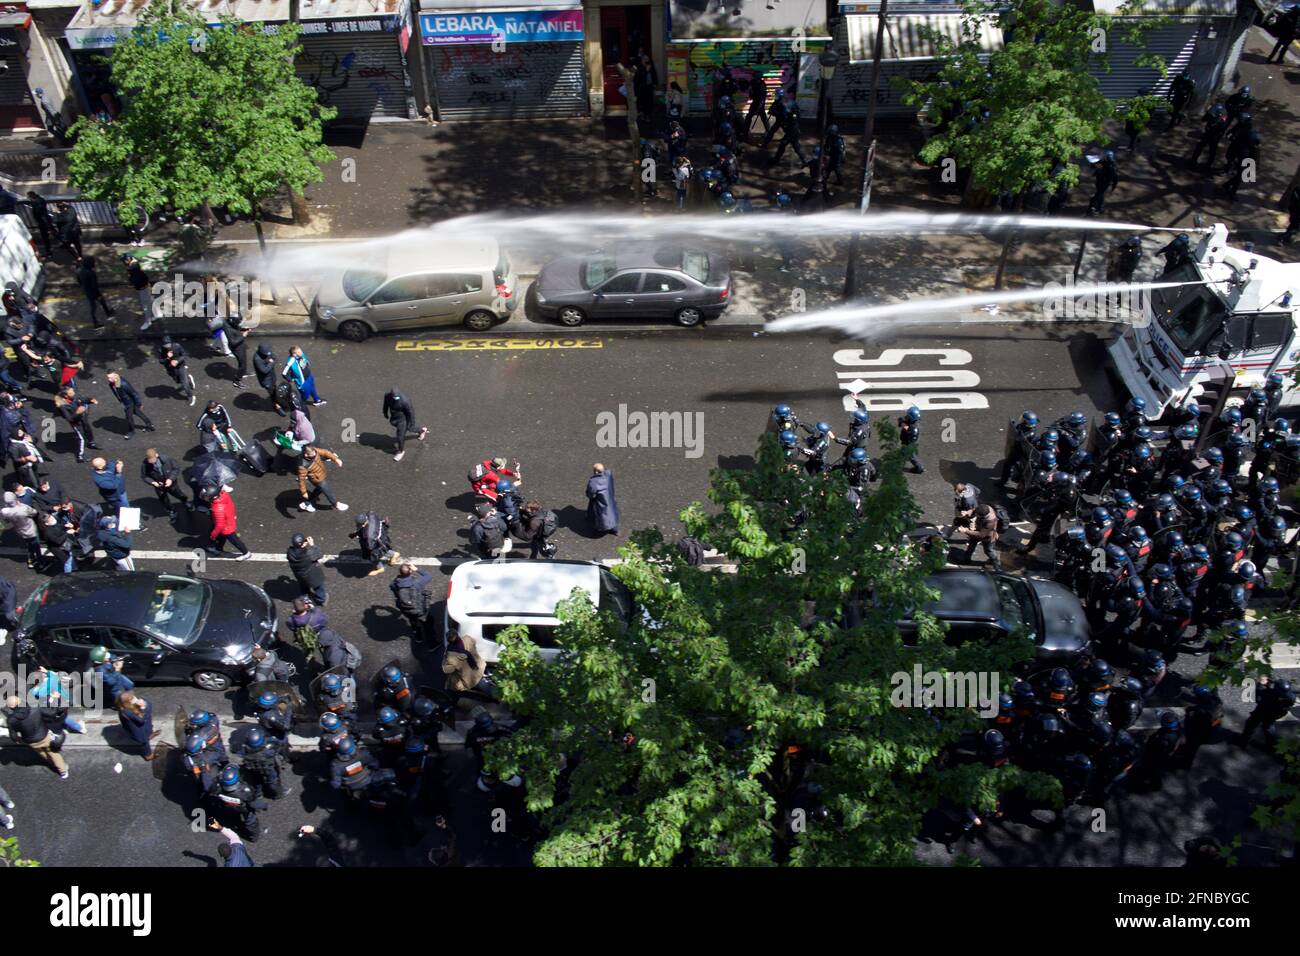 Police fire water cannons to disperse Palestine supporters gathered at Pro-Palestinian demonstration, Boulevard Barbès, Paris, France, May 15th, 2021 Stock Photo